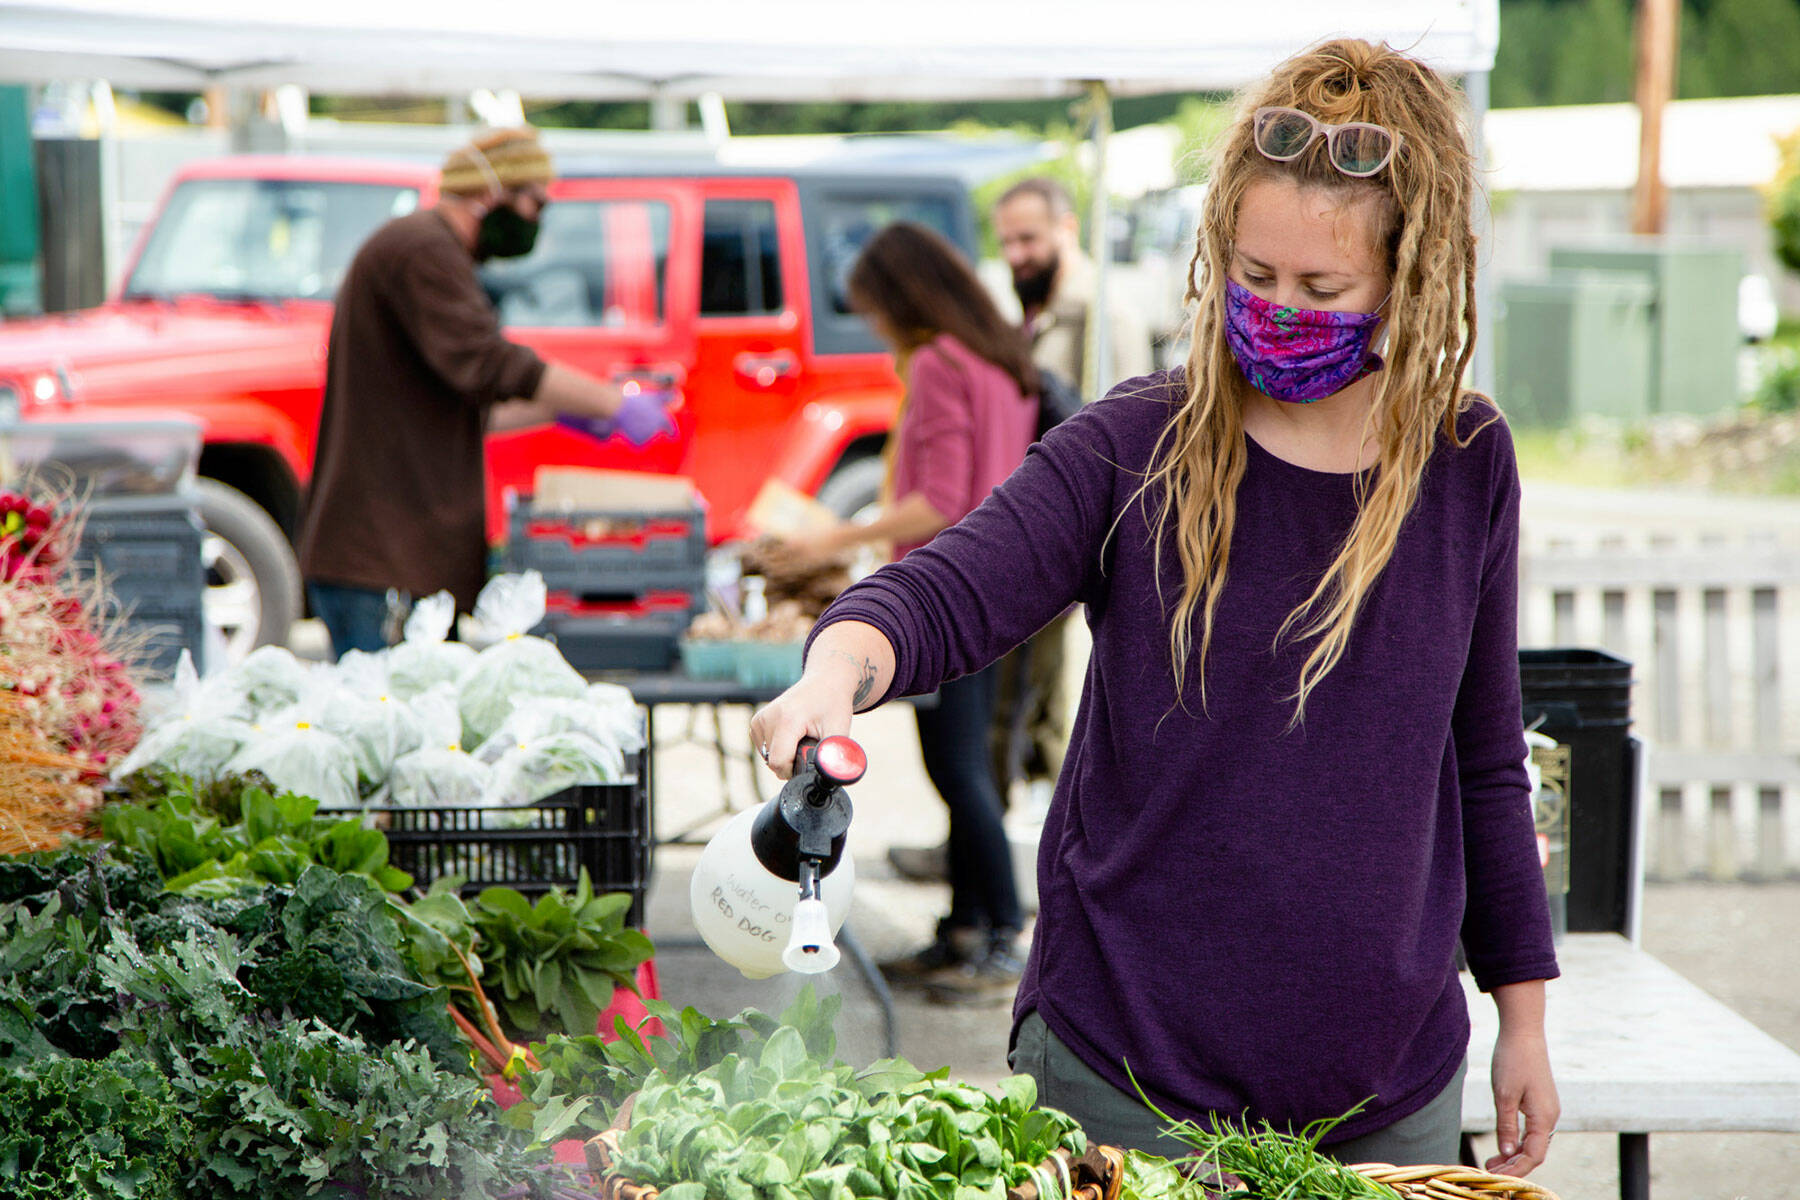 Emma Erickson with Red Dog Farm keeps produce fresh at an earlier Chimacum Farmers Market. (Andrew Wiese)